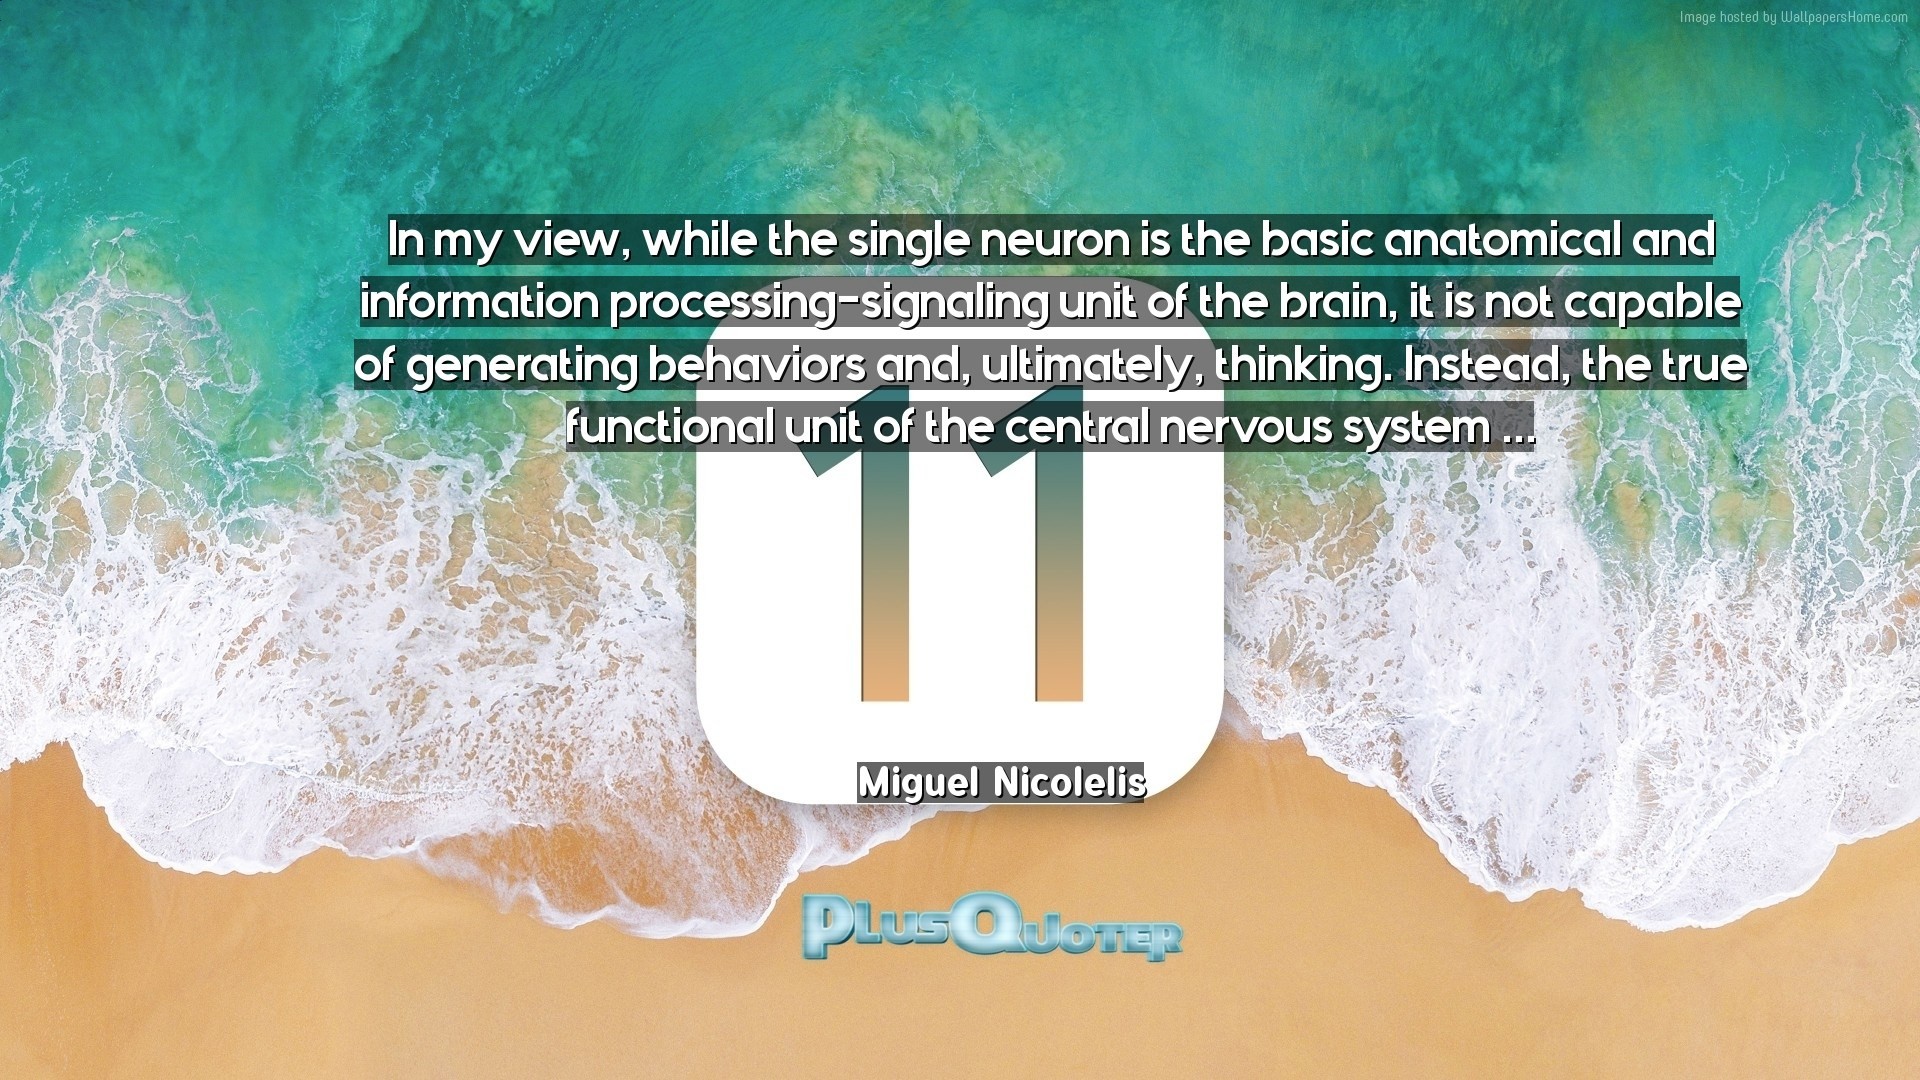 1920x1080 Download Wallpaper with inspirational Quotes- "In my view, while the single  neuron is